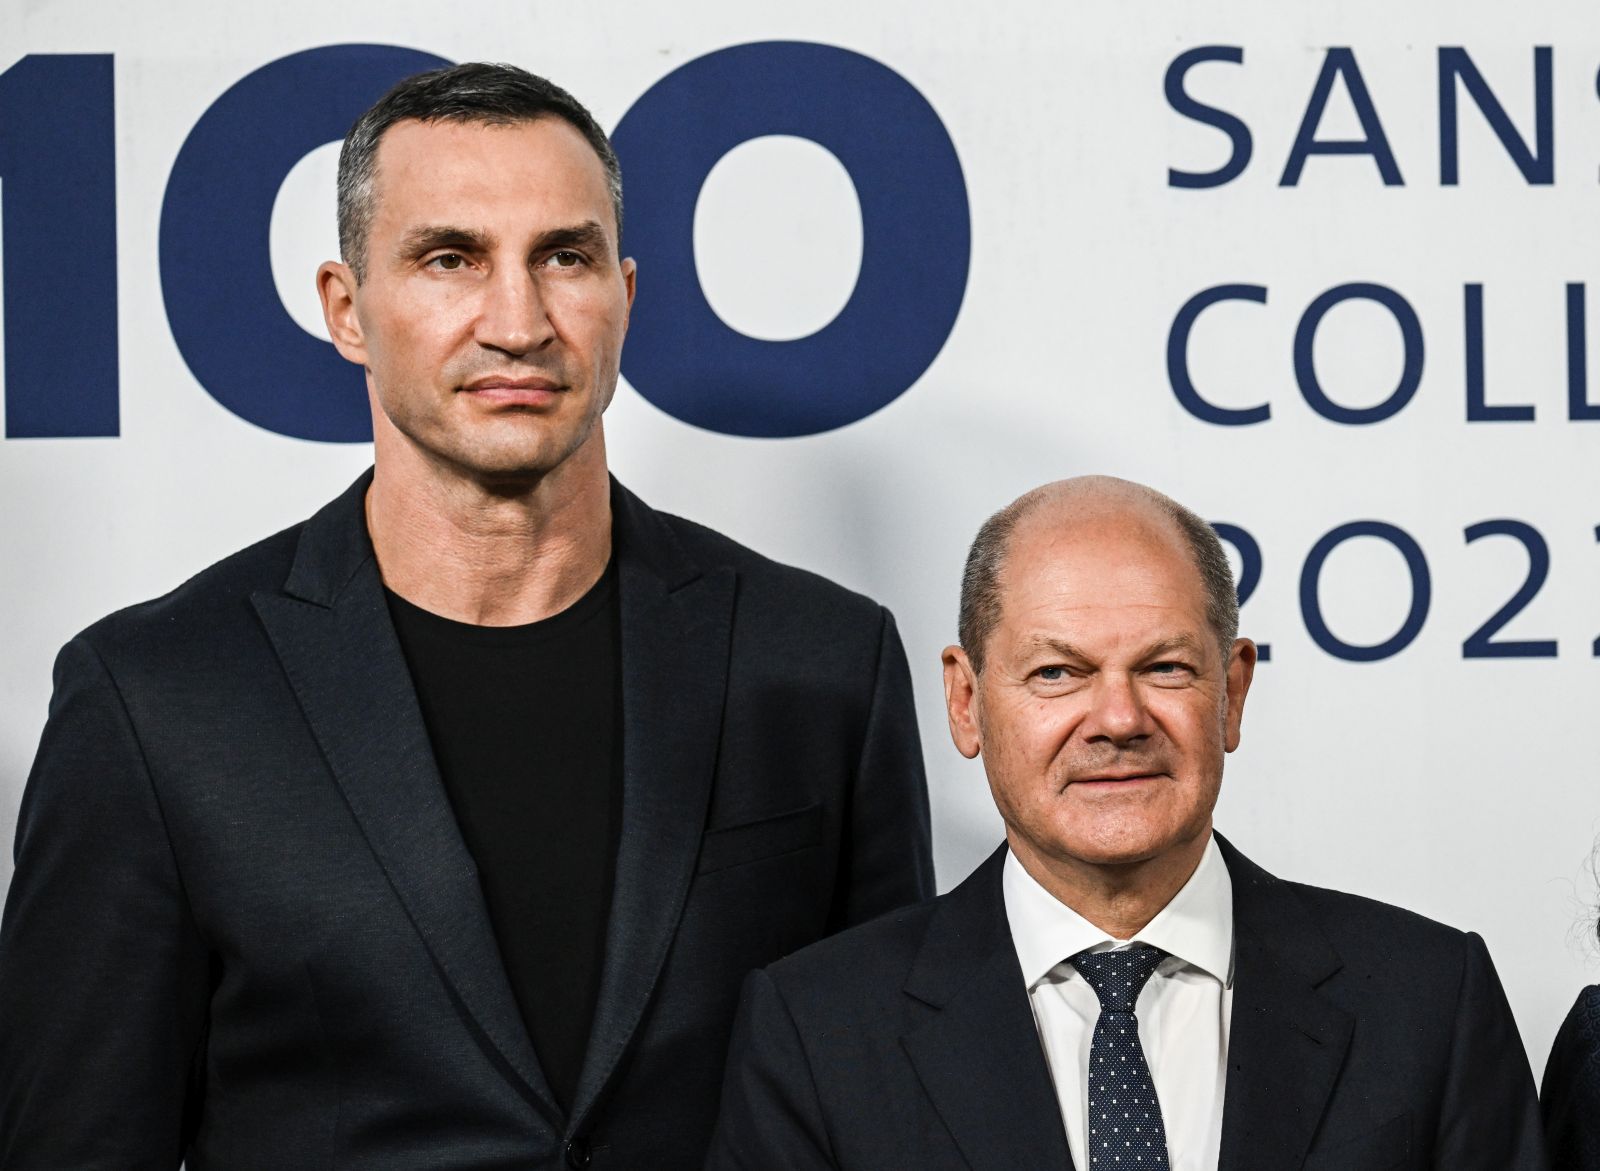 epa10186262 Ukrainian former professional boxer Wladimir Klitschko (L) and German Chancellor Olaf Scholz (R) pose for photo prior to the award ceremony of the international media conference M100 Sanssouci Colloquium in Potsdam, Germany, 15 September 2022. Wladimir Klitschko will accept the M100 Media Award to the People of Ukraine. The international forum brings together Europe's top editors, commentators and media owners (print, broadcasting and internet) alongside key public figures to assess the role and impact of the media in international affairs and to promote democracy and freedom of expression and speech.  EPA/FILIP SINGER